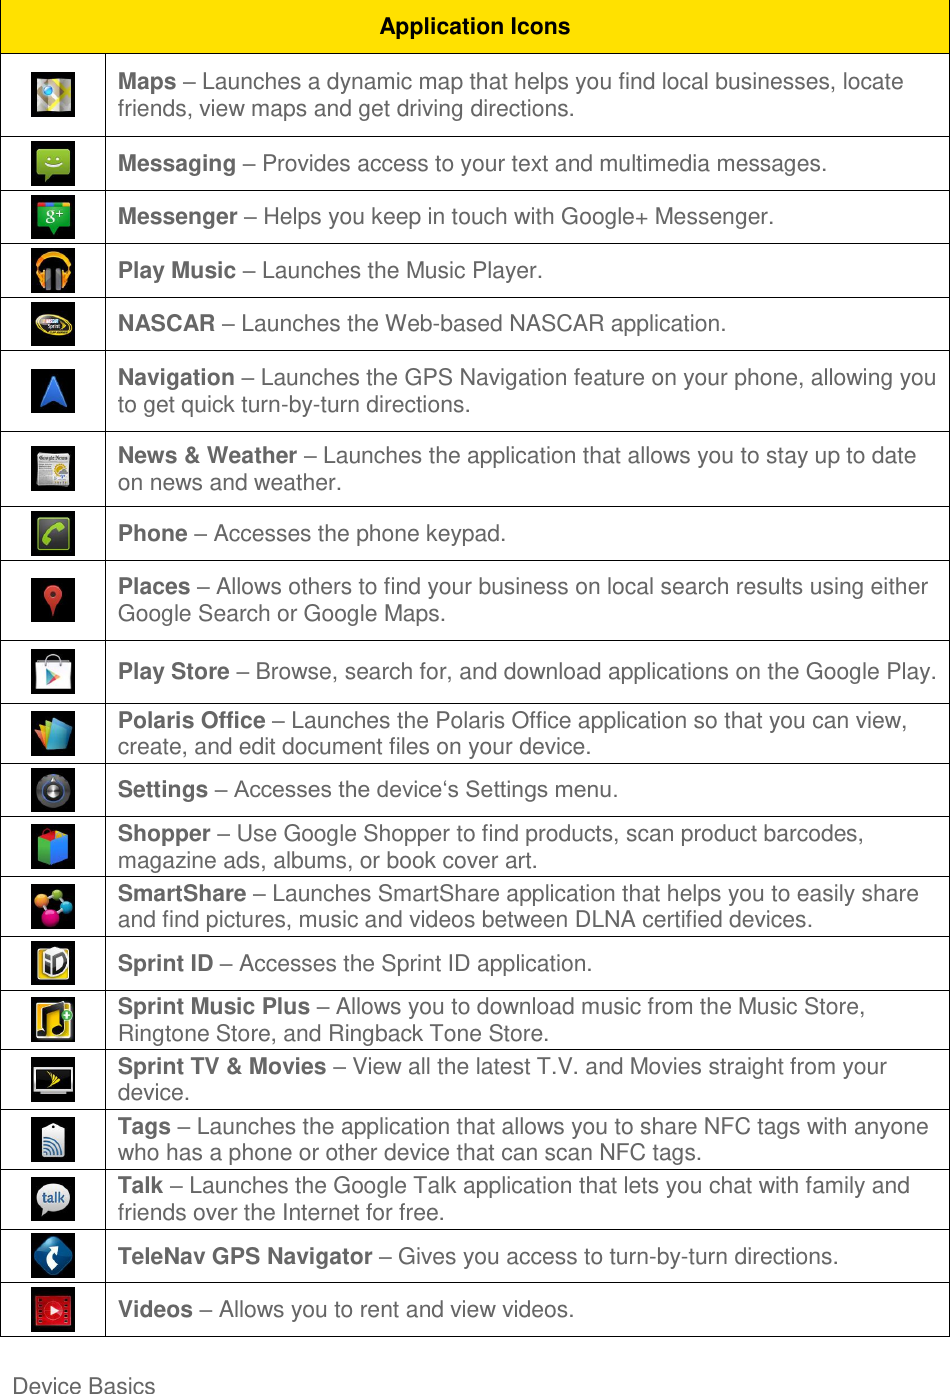 Device Basics     Application Icons  Maps  Launches a dynamic map that helps you find local businesses, locate friends, view maps and get driving directions.  Messaging  Provides access to your text and multimedia messages.  Messenger  Helps you keep in touch with Google+ Messenger.  Play Music  Launches the Music Player.  NASCAR  Launches the Web-based NASCAR application.  Navigation  Launches the GPS Navigation feature on your phone, allowing you to get quick turn-by-turn directions.  News &amp; Weather  Launches the application that allows you to stay up to date on news and weather.  Phone  Accesses the phone keypad.  Places  Allows others to find your business on local search results using either Google Search or Google Maps.  Play Store  Browse, search for, and download applications on the Google Play.  Polaris Office  Launches the Polaris Office application so that you can view, create, and edit document files on your device.  Settings    Shopper  Use Google Shopper to find products, scan product barcodes, magazine ads, albums, or book cover art.  SmartShare  Launches SmartShare application that helps you to easily share and find pictures, music and videos between DLNA certified devices.  Sprint ID  Accesses the Sprint ID application.  Sprint Music Plus  Allows you to download music from the Music Store, Ringtone Store, and Ringback Tone Store.  Sprint TV &amp; Movies  View all the latest T.V. and Movies straight from your device.  Tags  Launches the application that allows you to share NFC tags with anyone who has a phone or other device that can scan NFC tags.  Talk  Launches the Google Talk application that lets you chat with family and friends over the Internet for free.  TeleNav GPS Navigator  Gives you access to turn-by-turn directions.  Videos  Allows you to rent and view videos. 